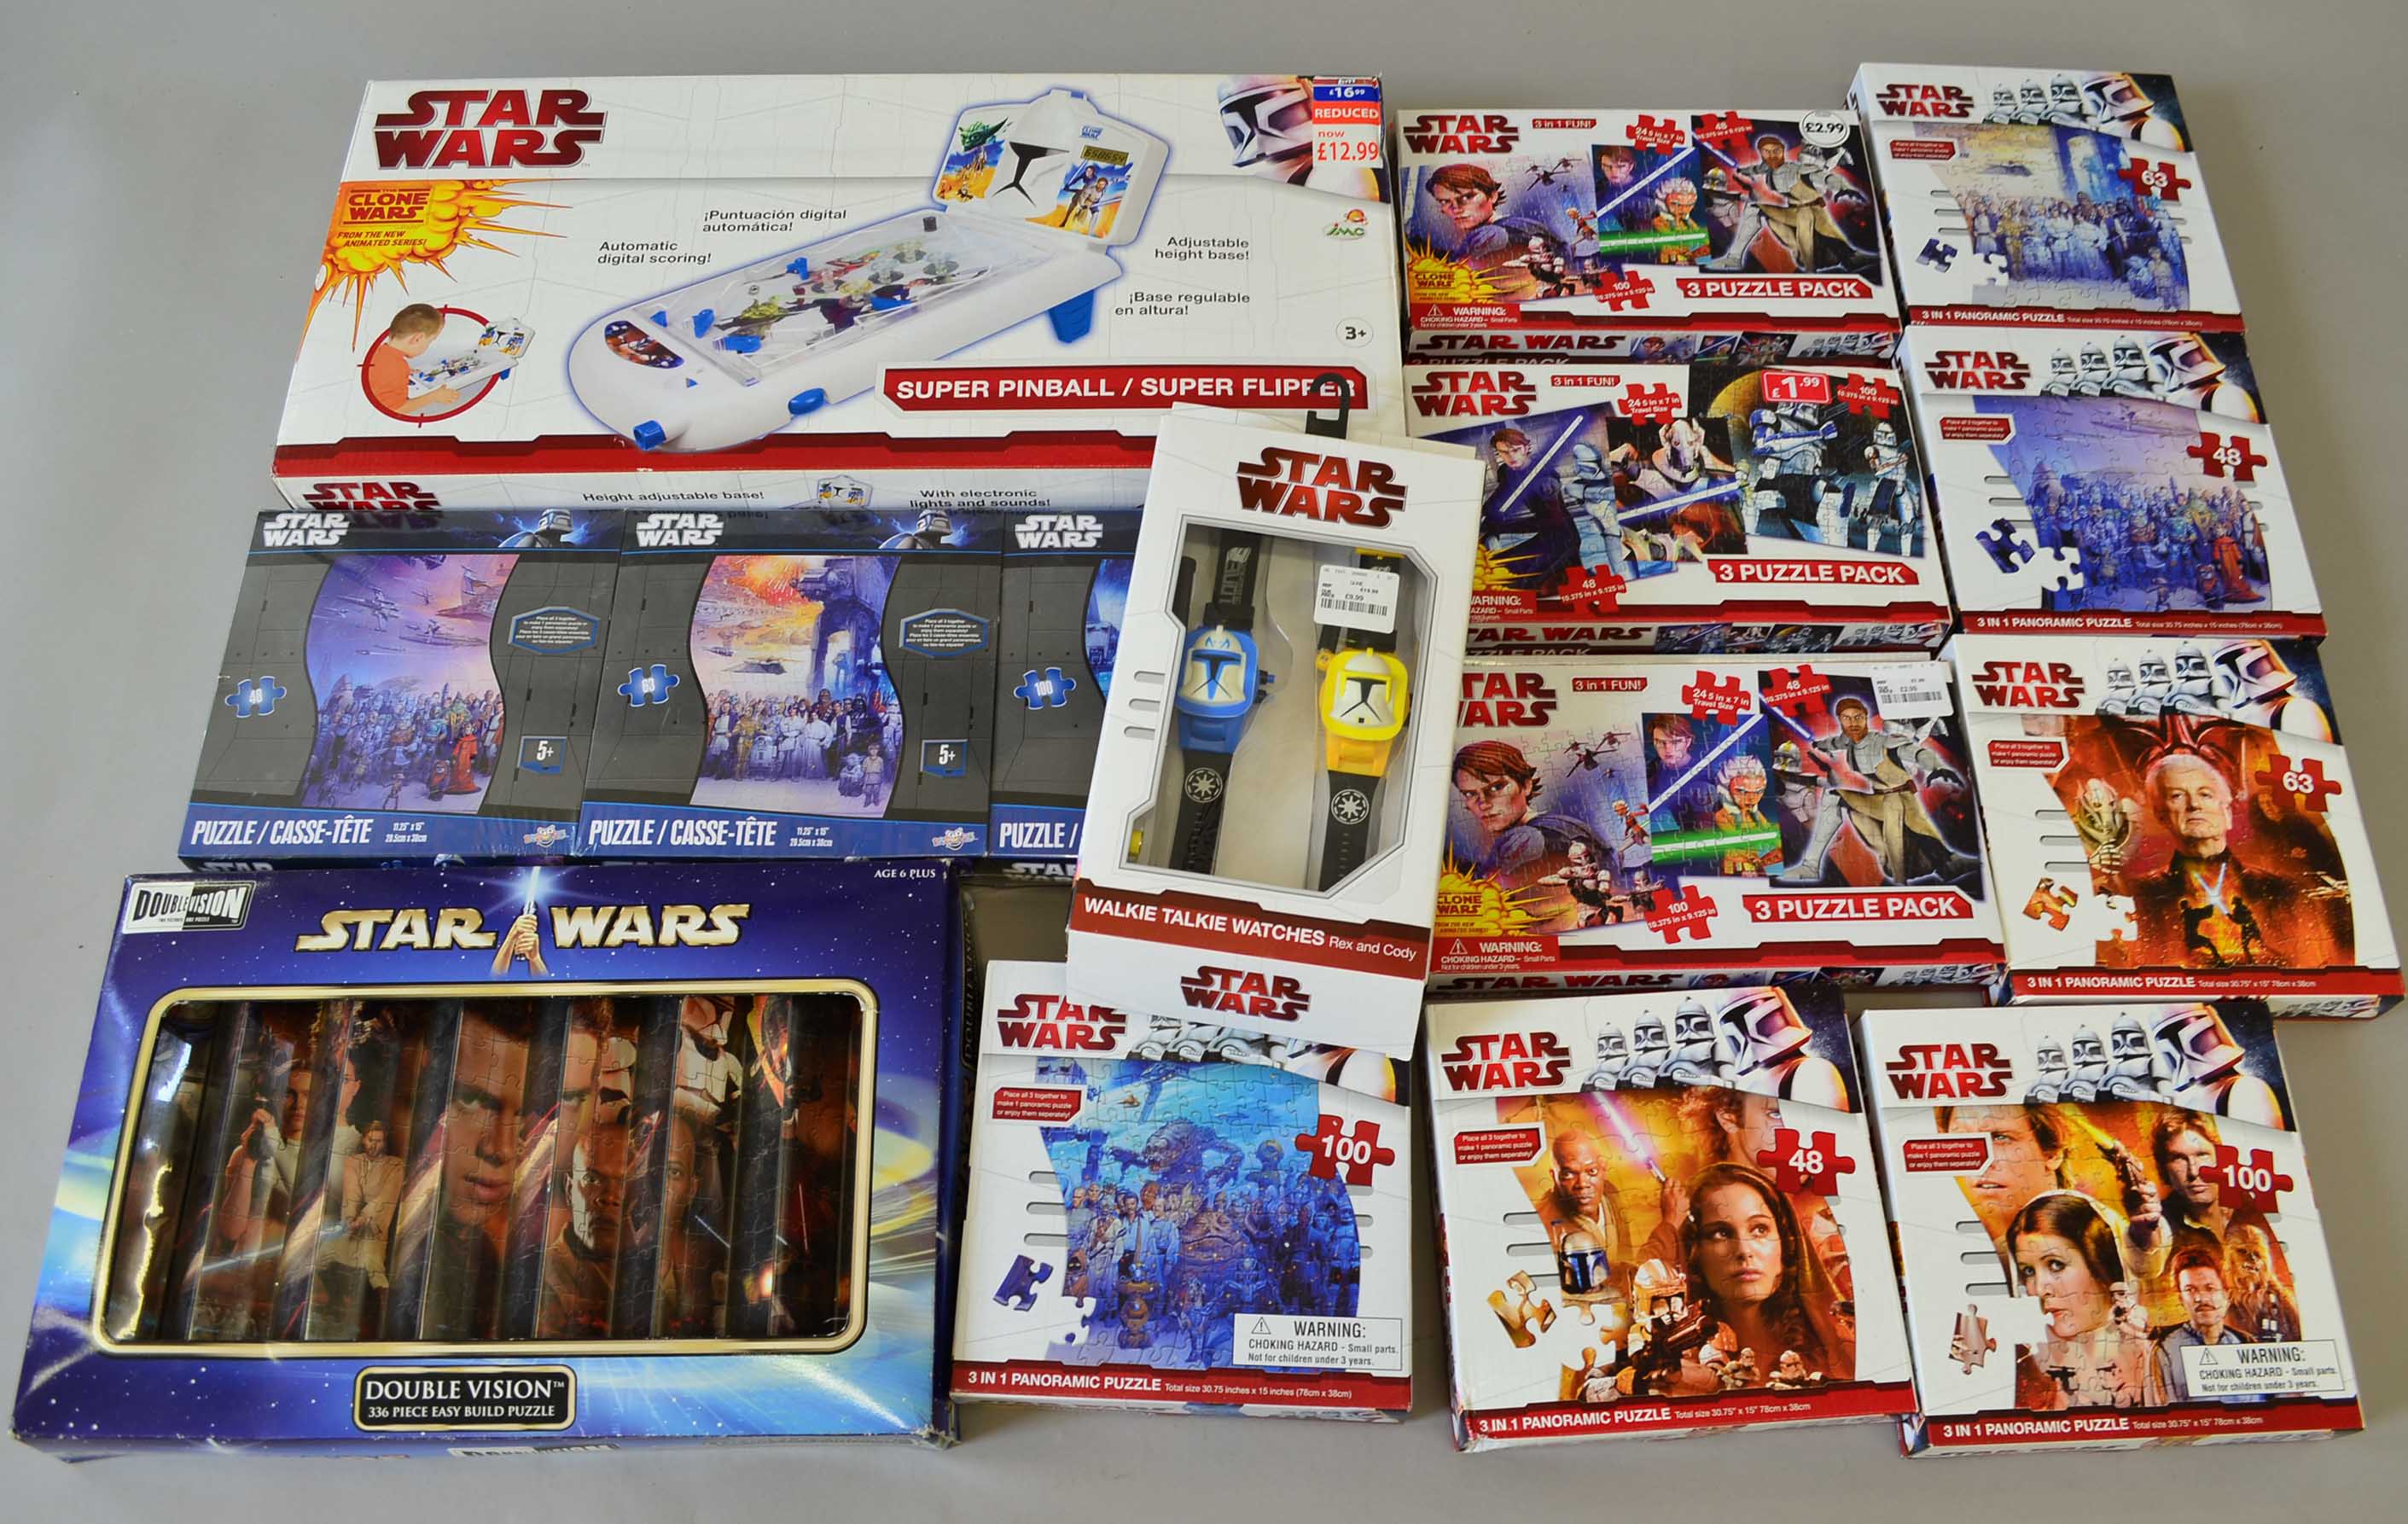 Good quantity of Star Wars Toys and Mechandise, includes14 x Star Wars Revenge of the Sith toys: